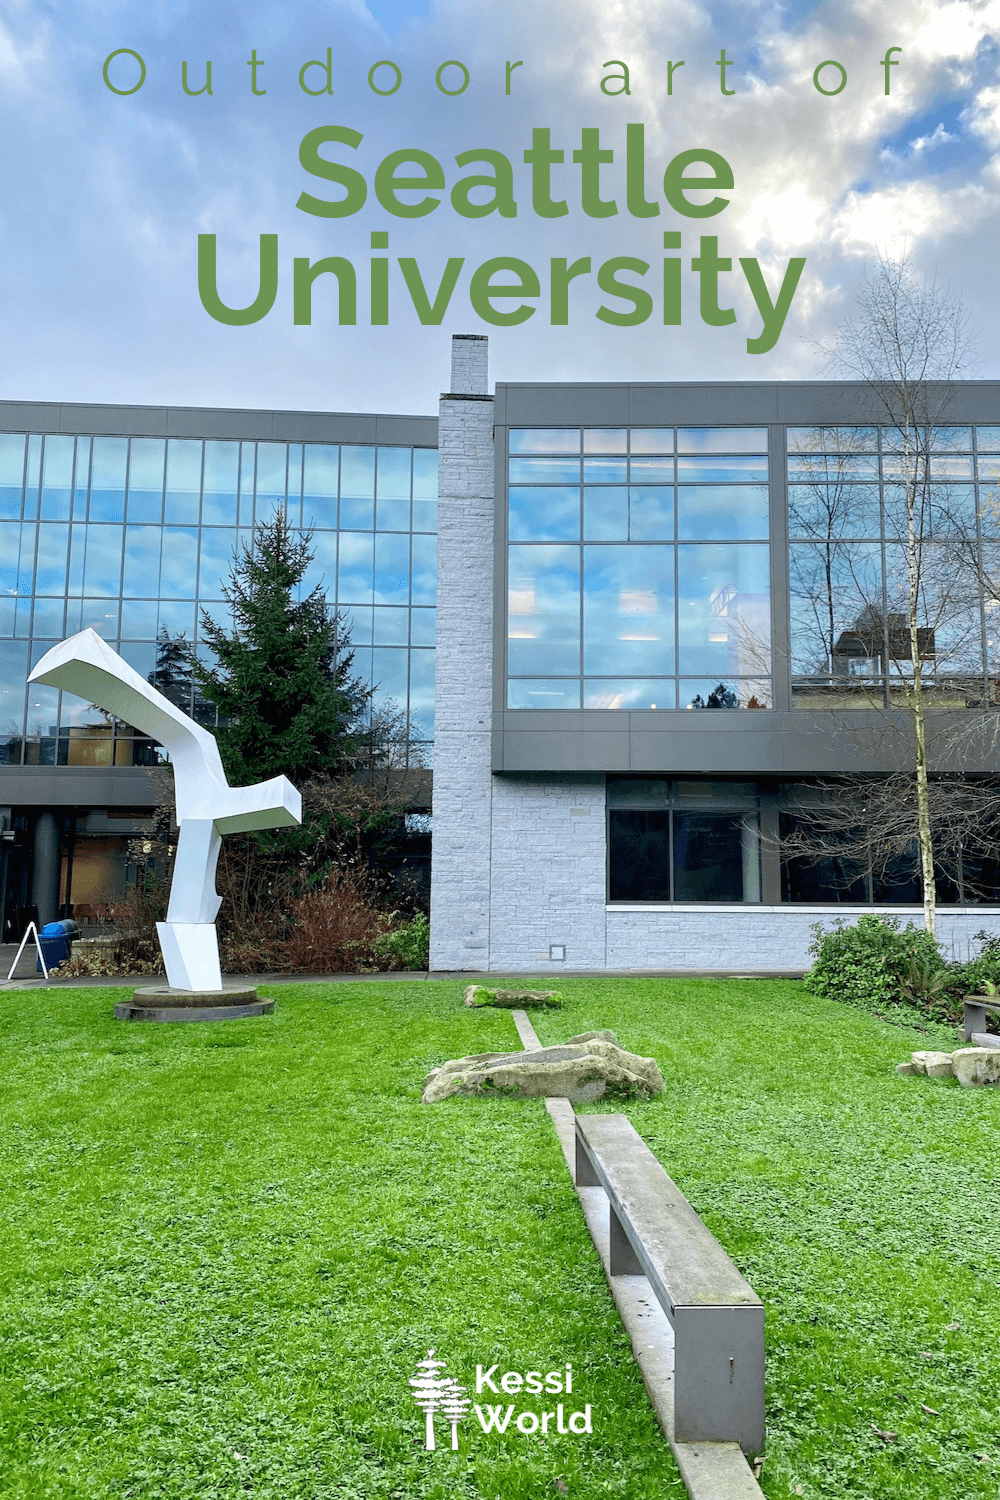 This Pinterest pin shows Art at Seattle University in the middle of the grass covered quad area. A large metallic sculpture is the centerpiece against shiny glass windows of the student union building.